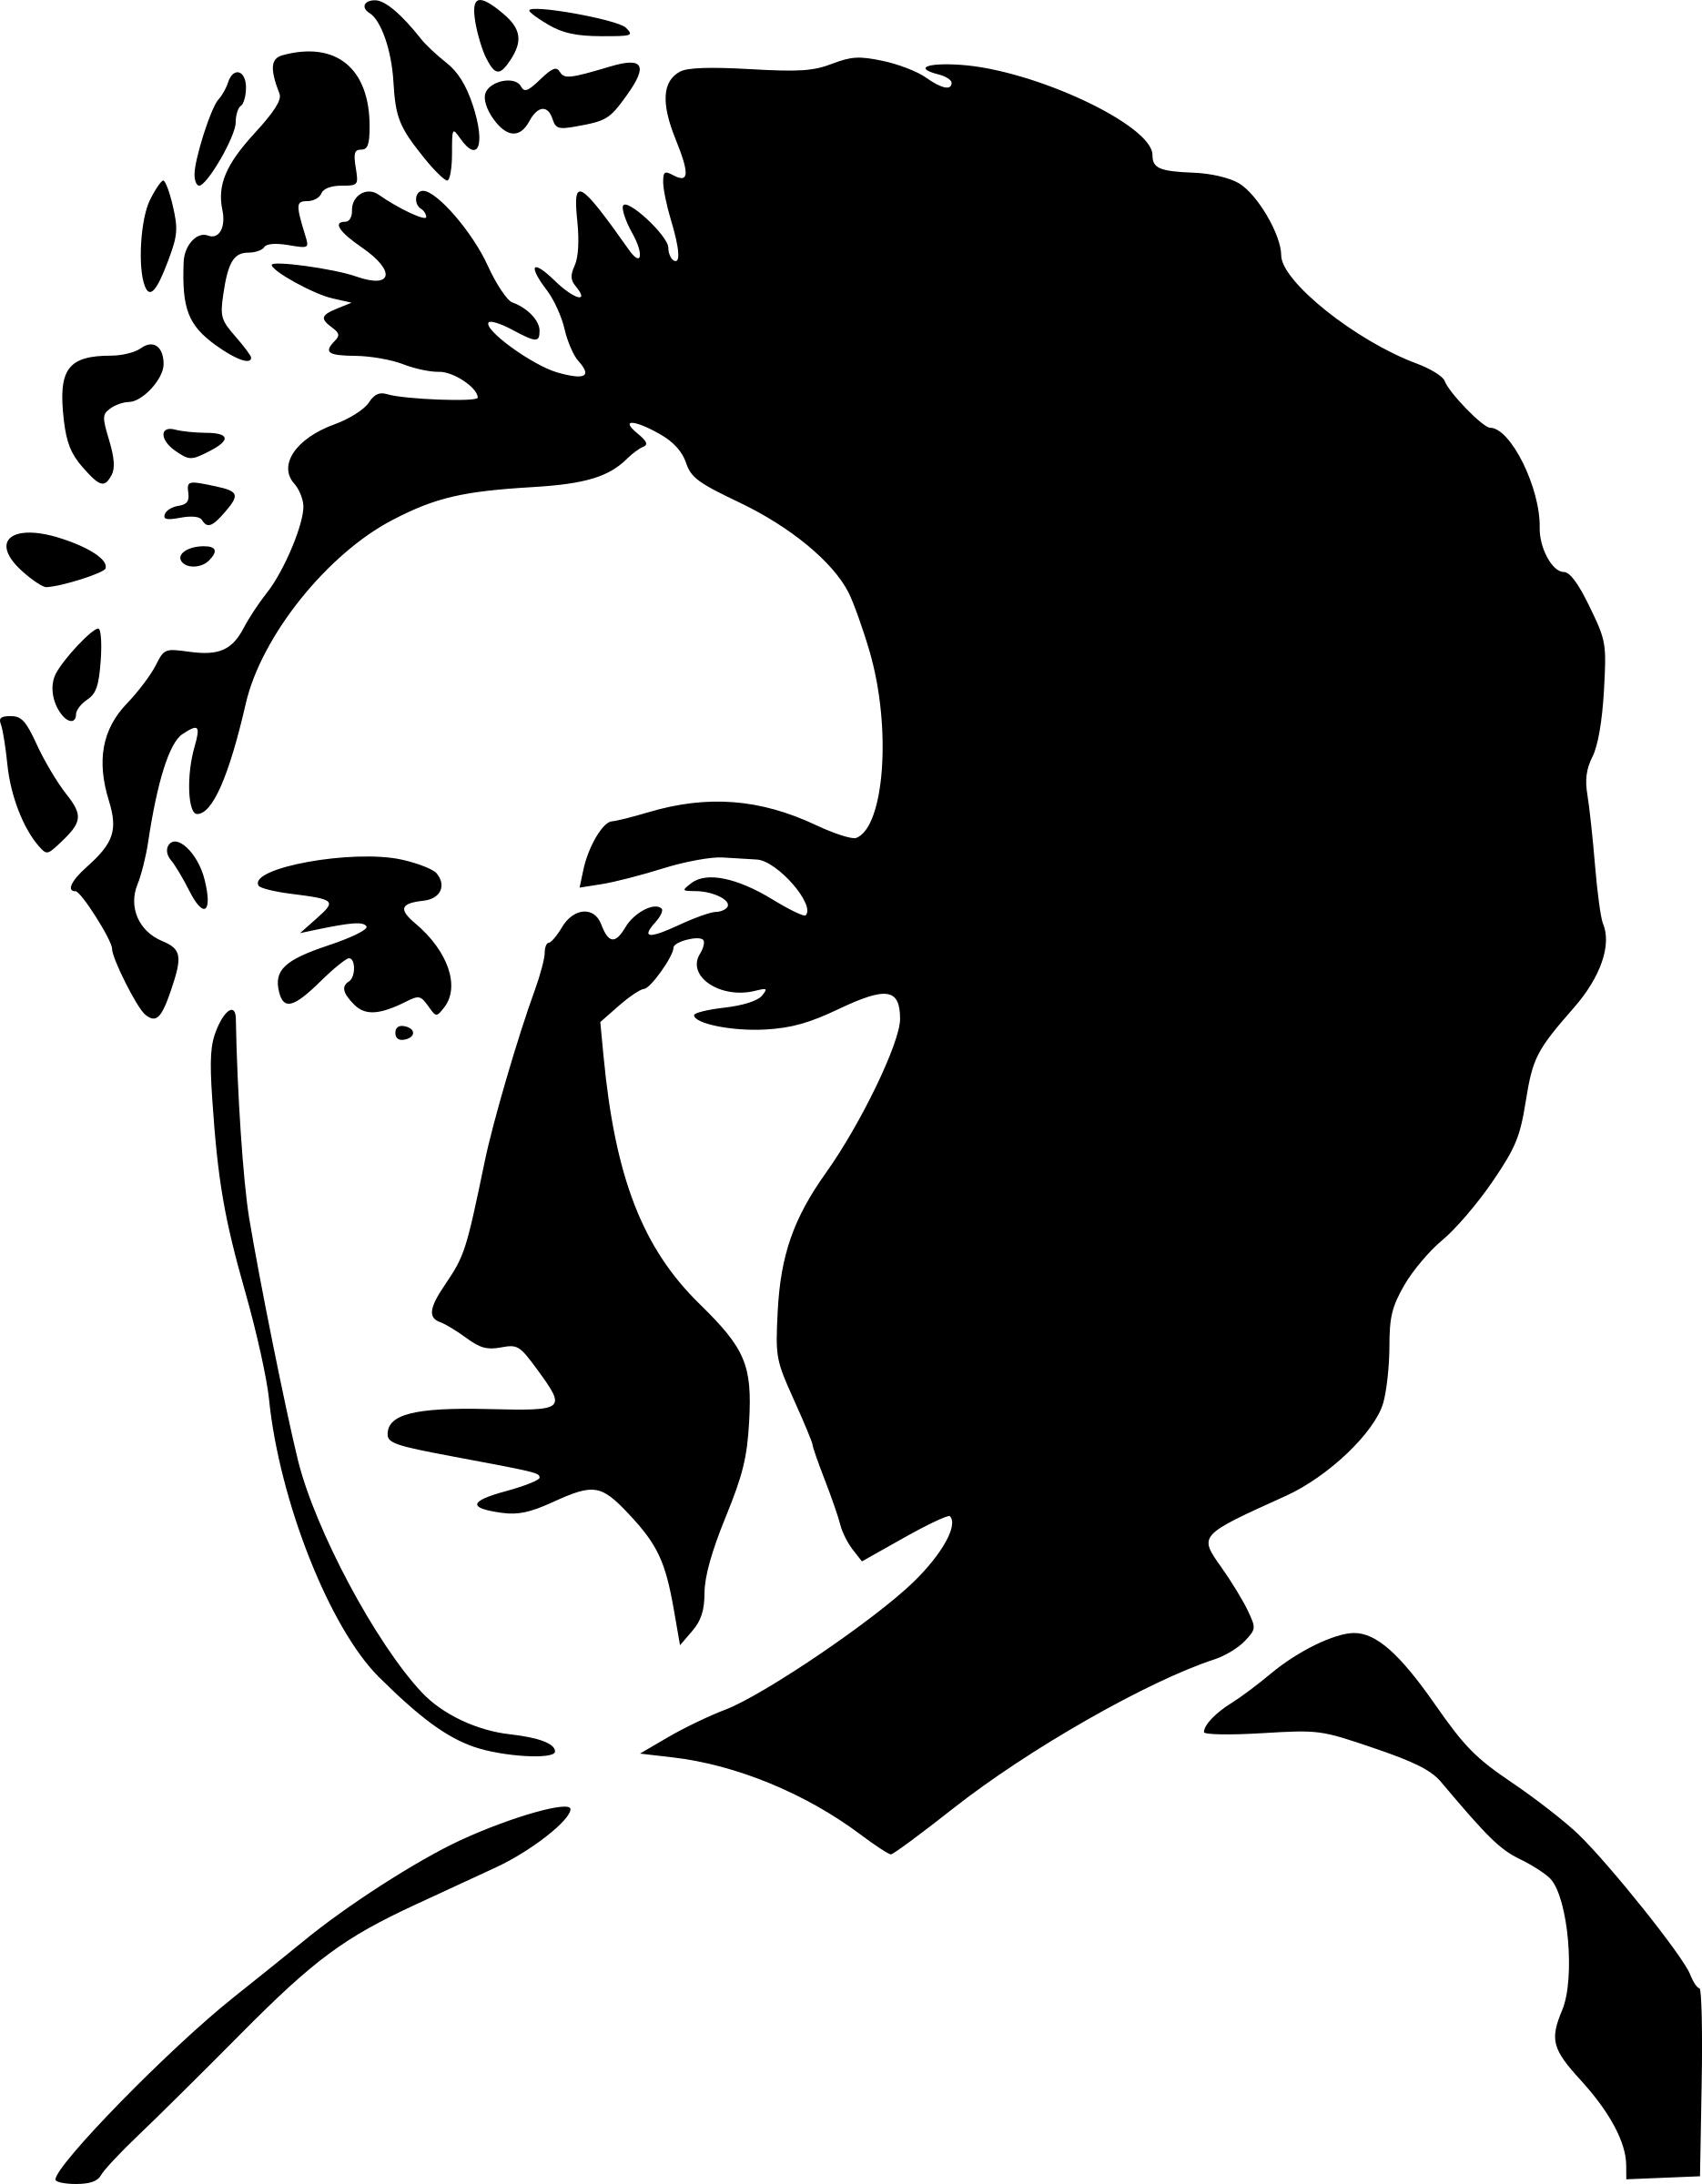 rosa luxemburg png